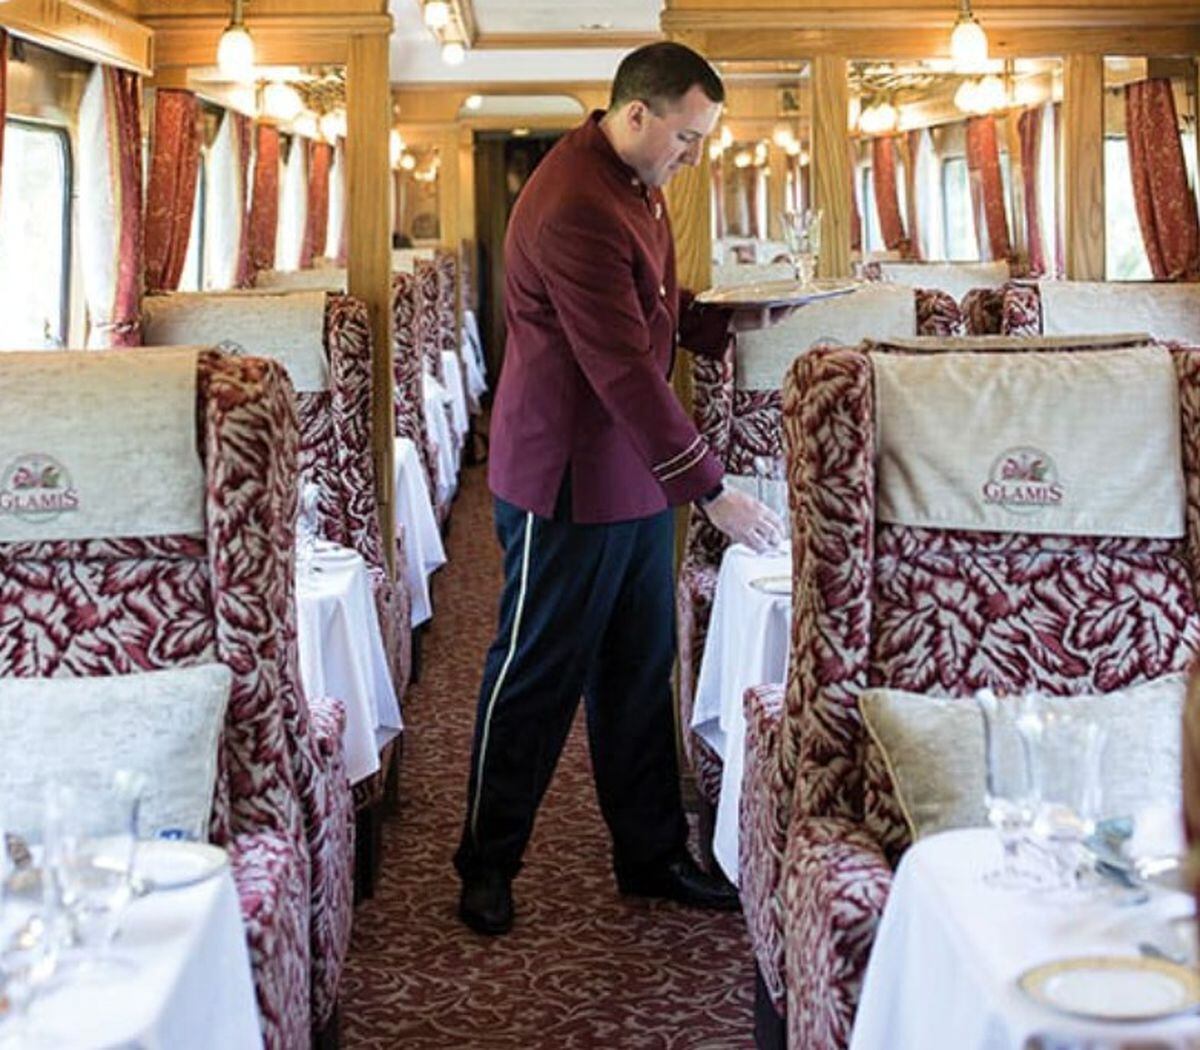 Passengers can expect "the experience of a lifetime" on the Northern Belle.